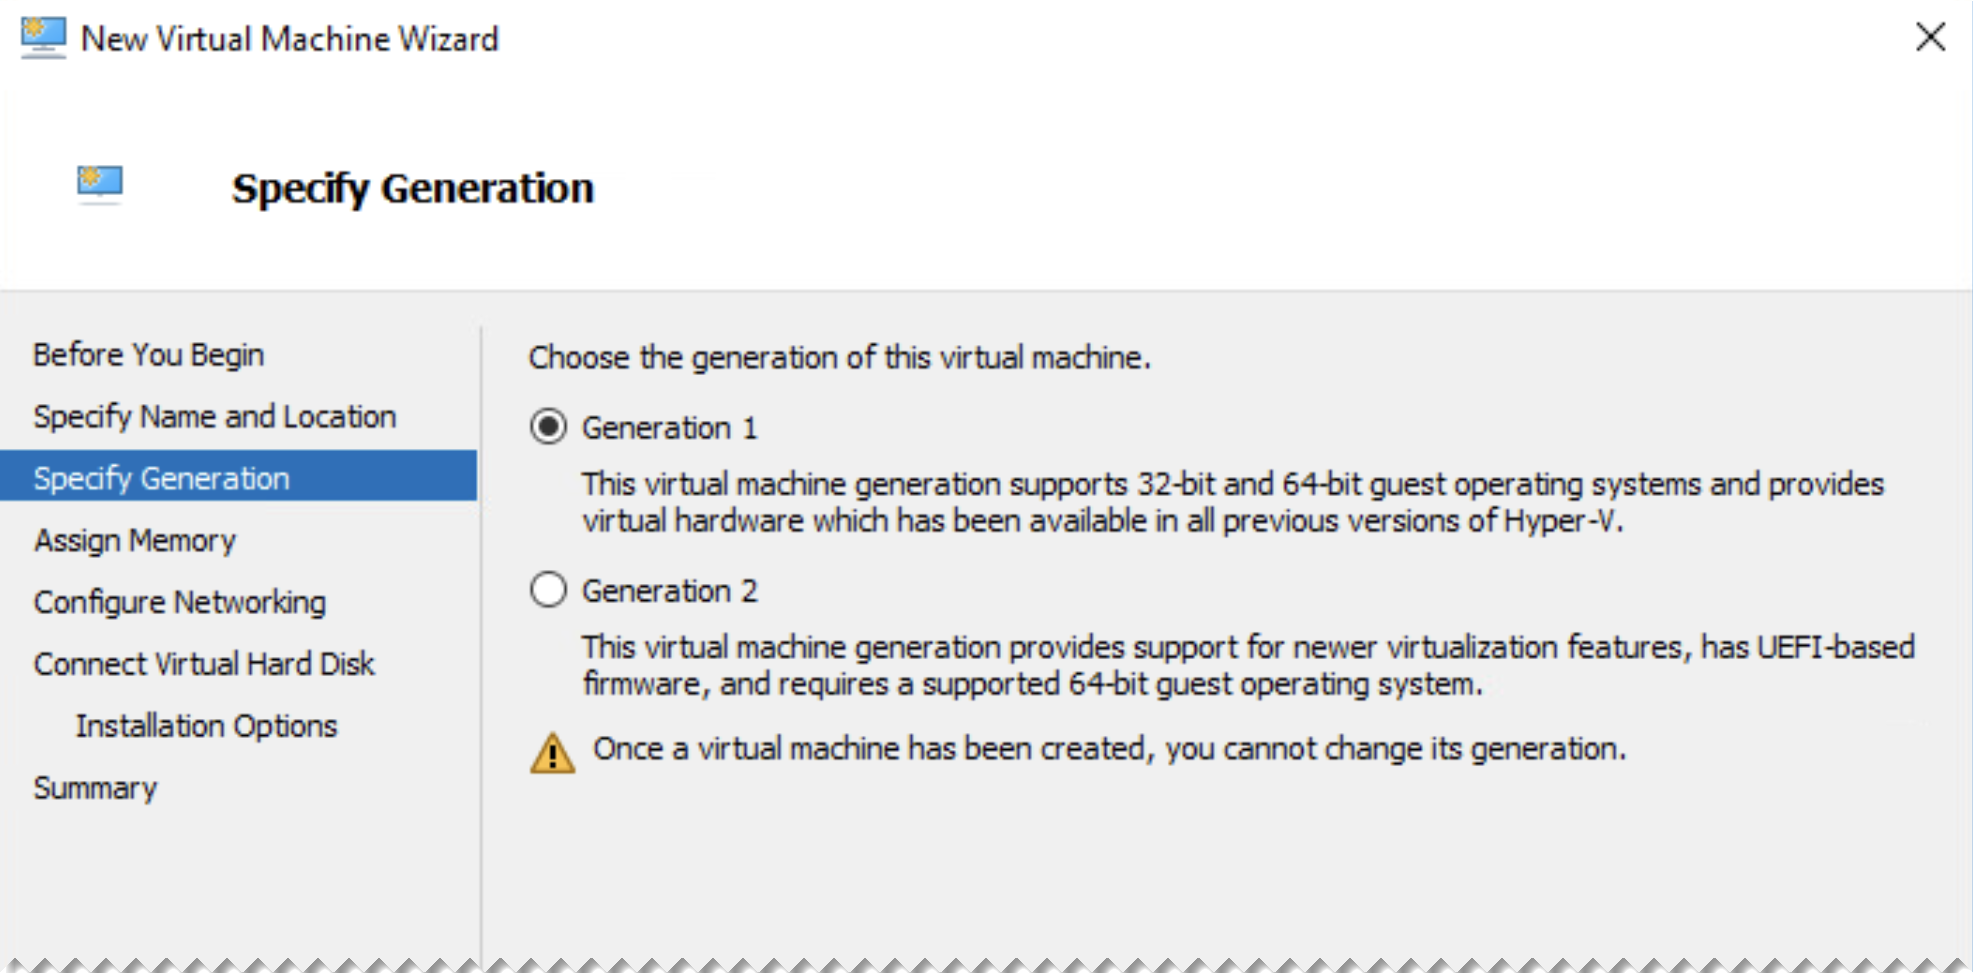 Specify Generation page